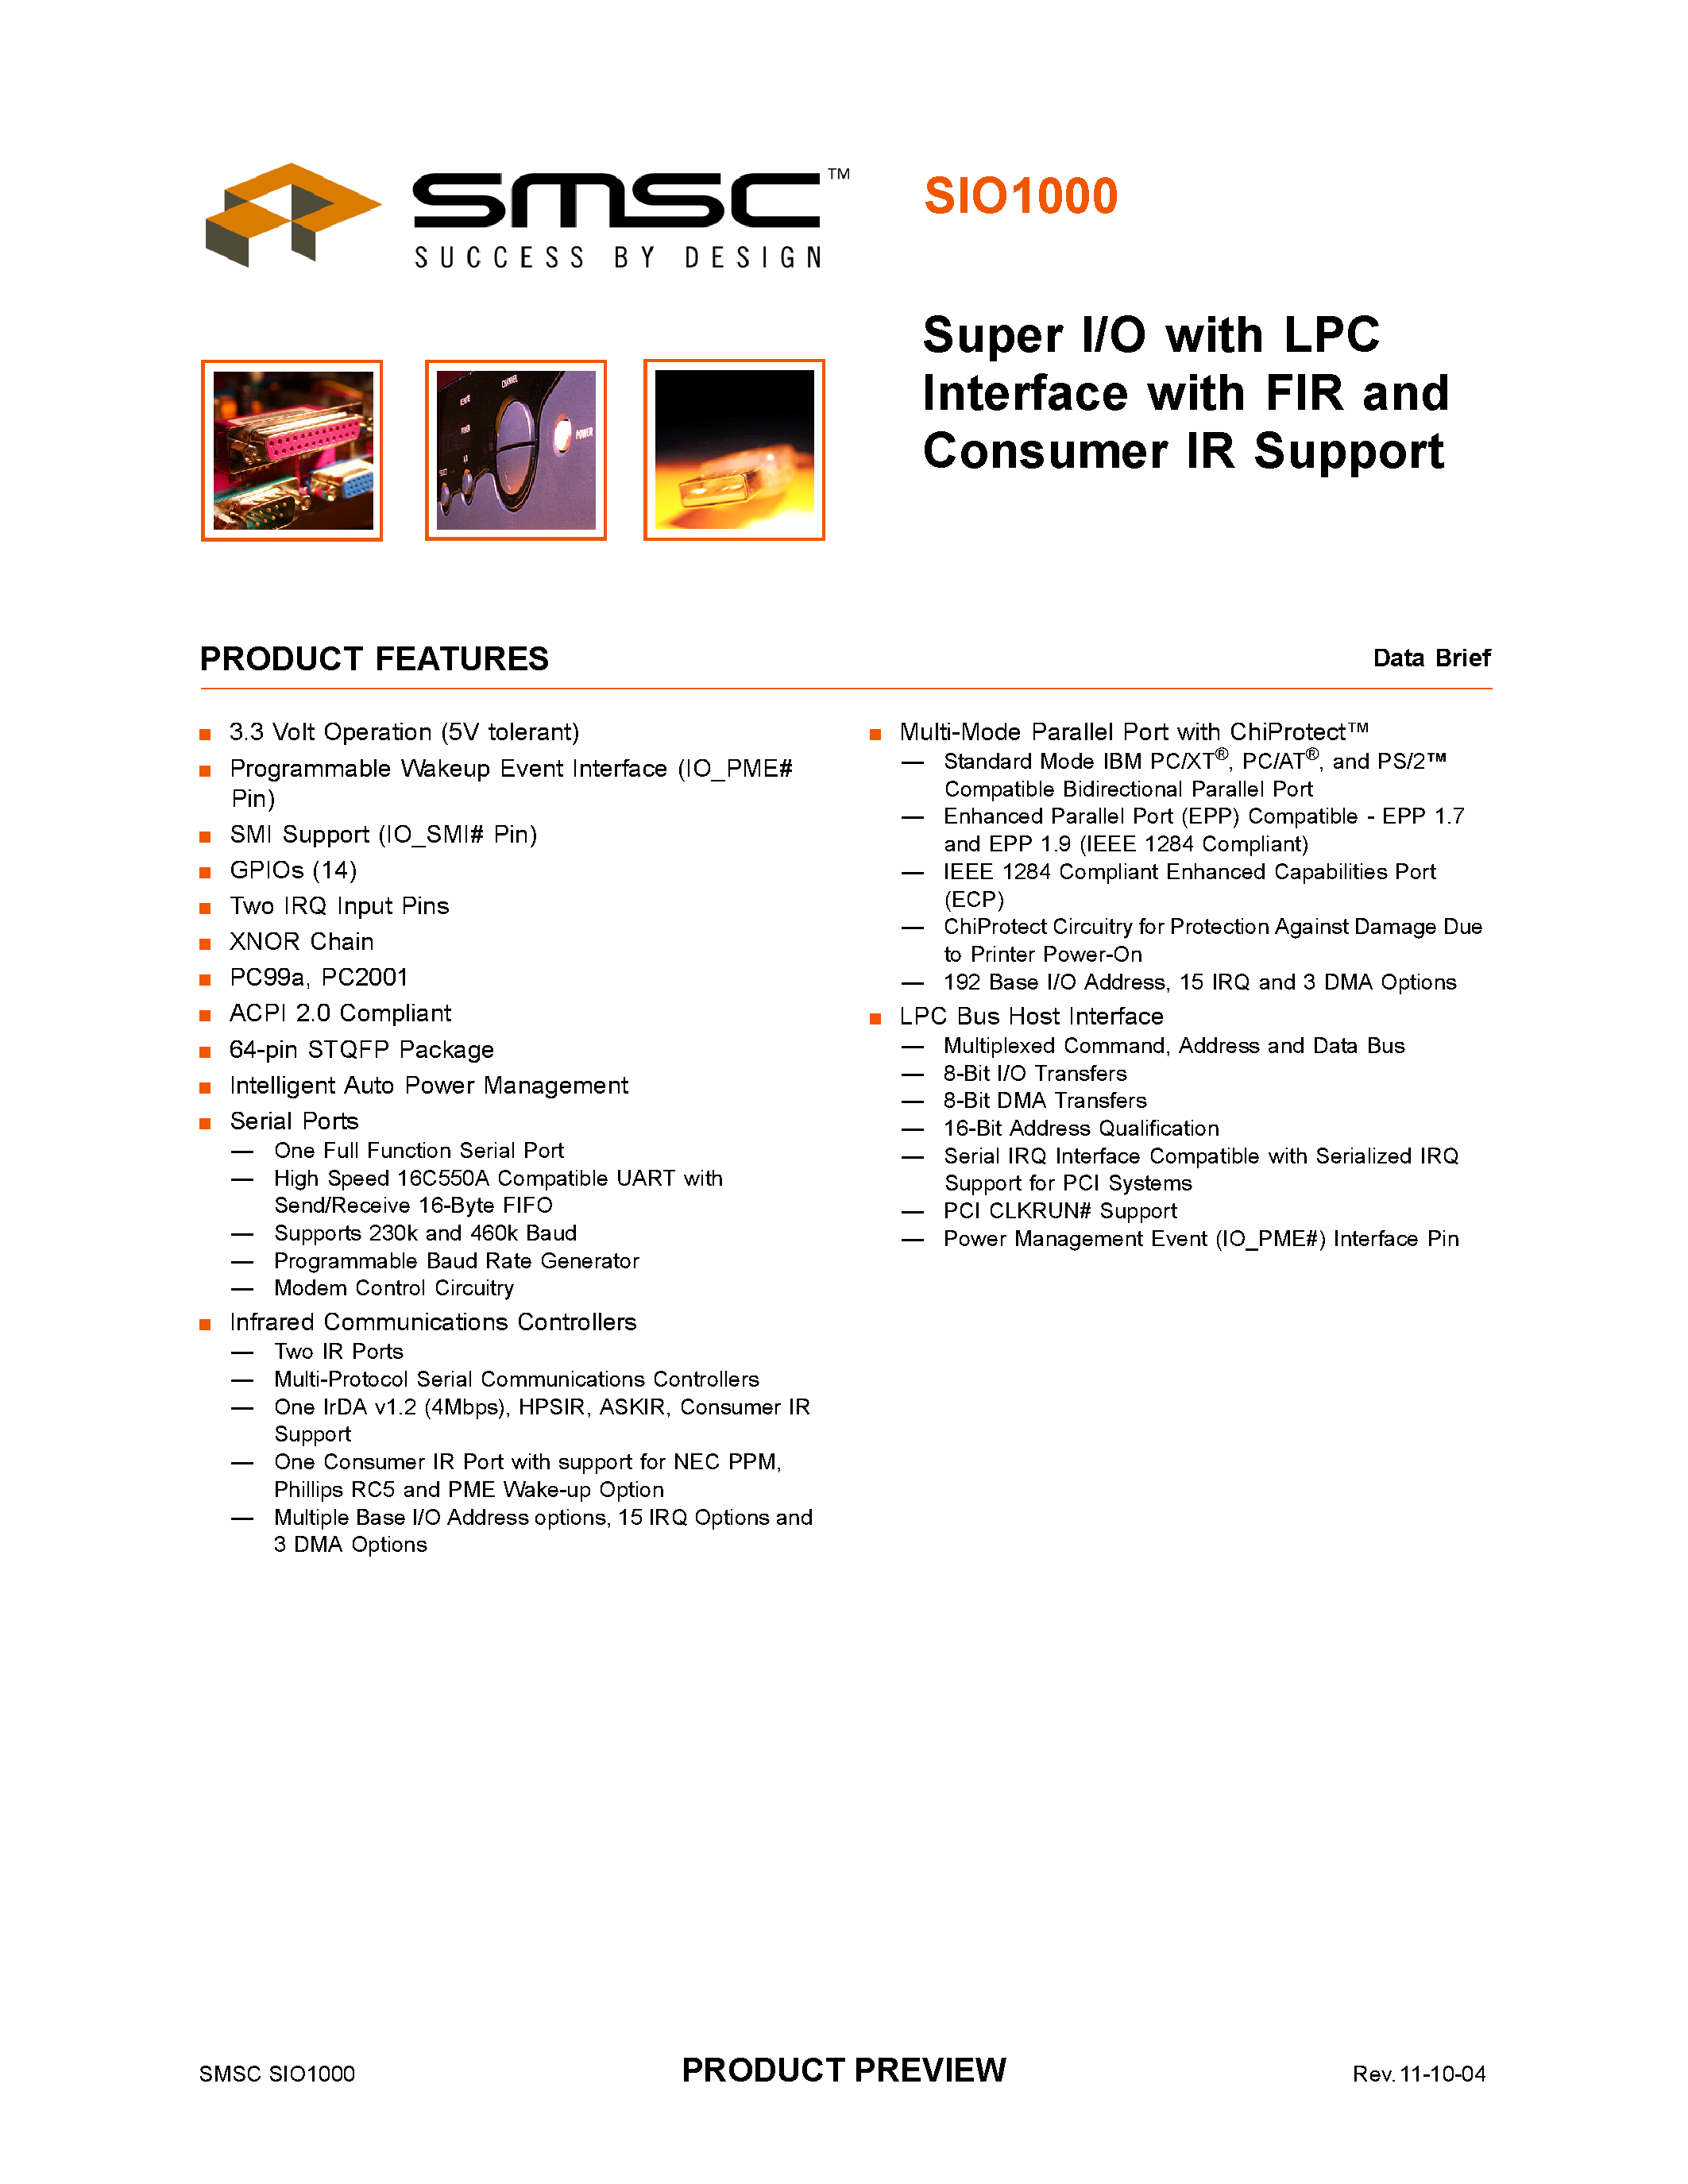 Datasheet SIO1000-JV - SUPER I/O WITH LPC INTERFACE WITH FIR AND CONSUMER IR SUPPORT page 1